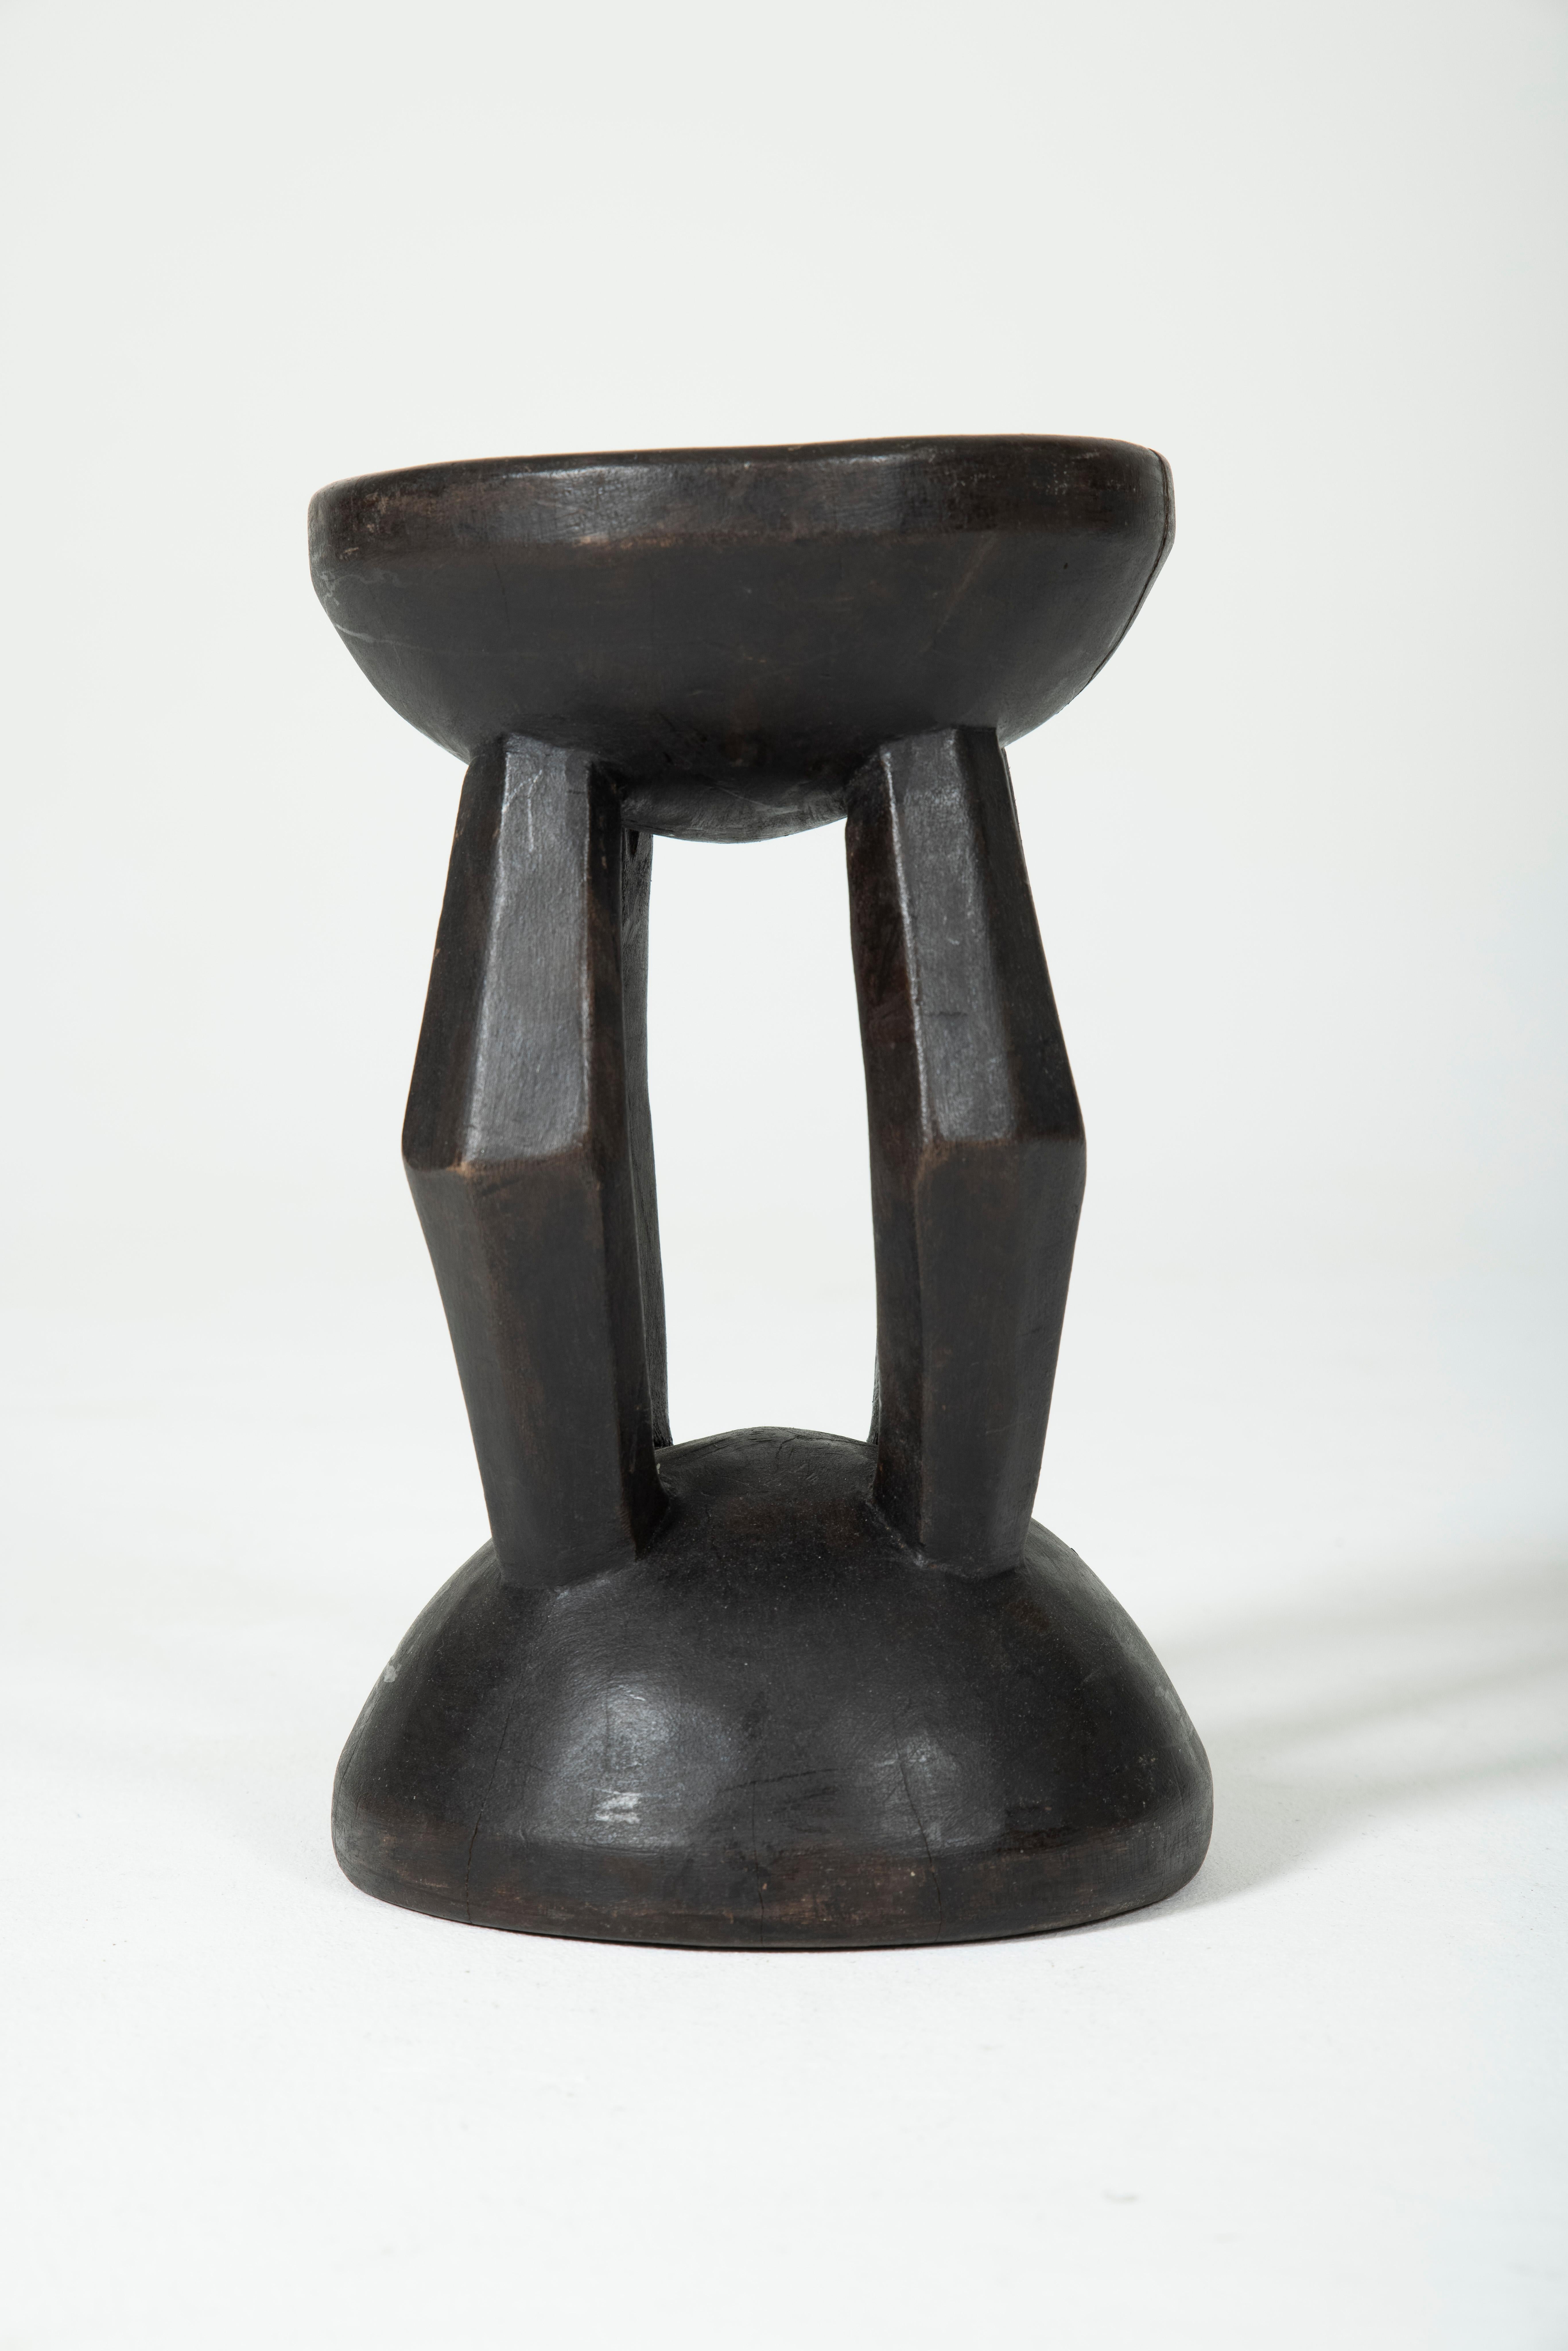 20th Century Stool or Side Table Dogon